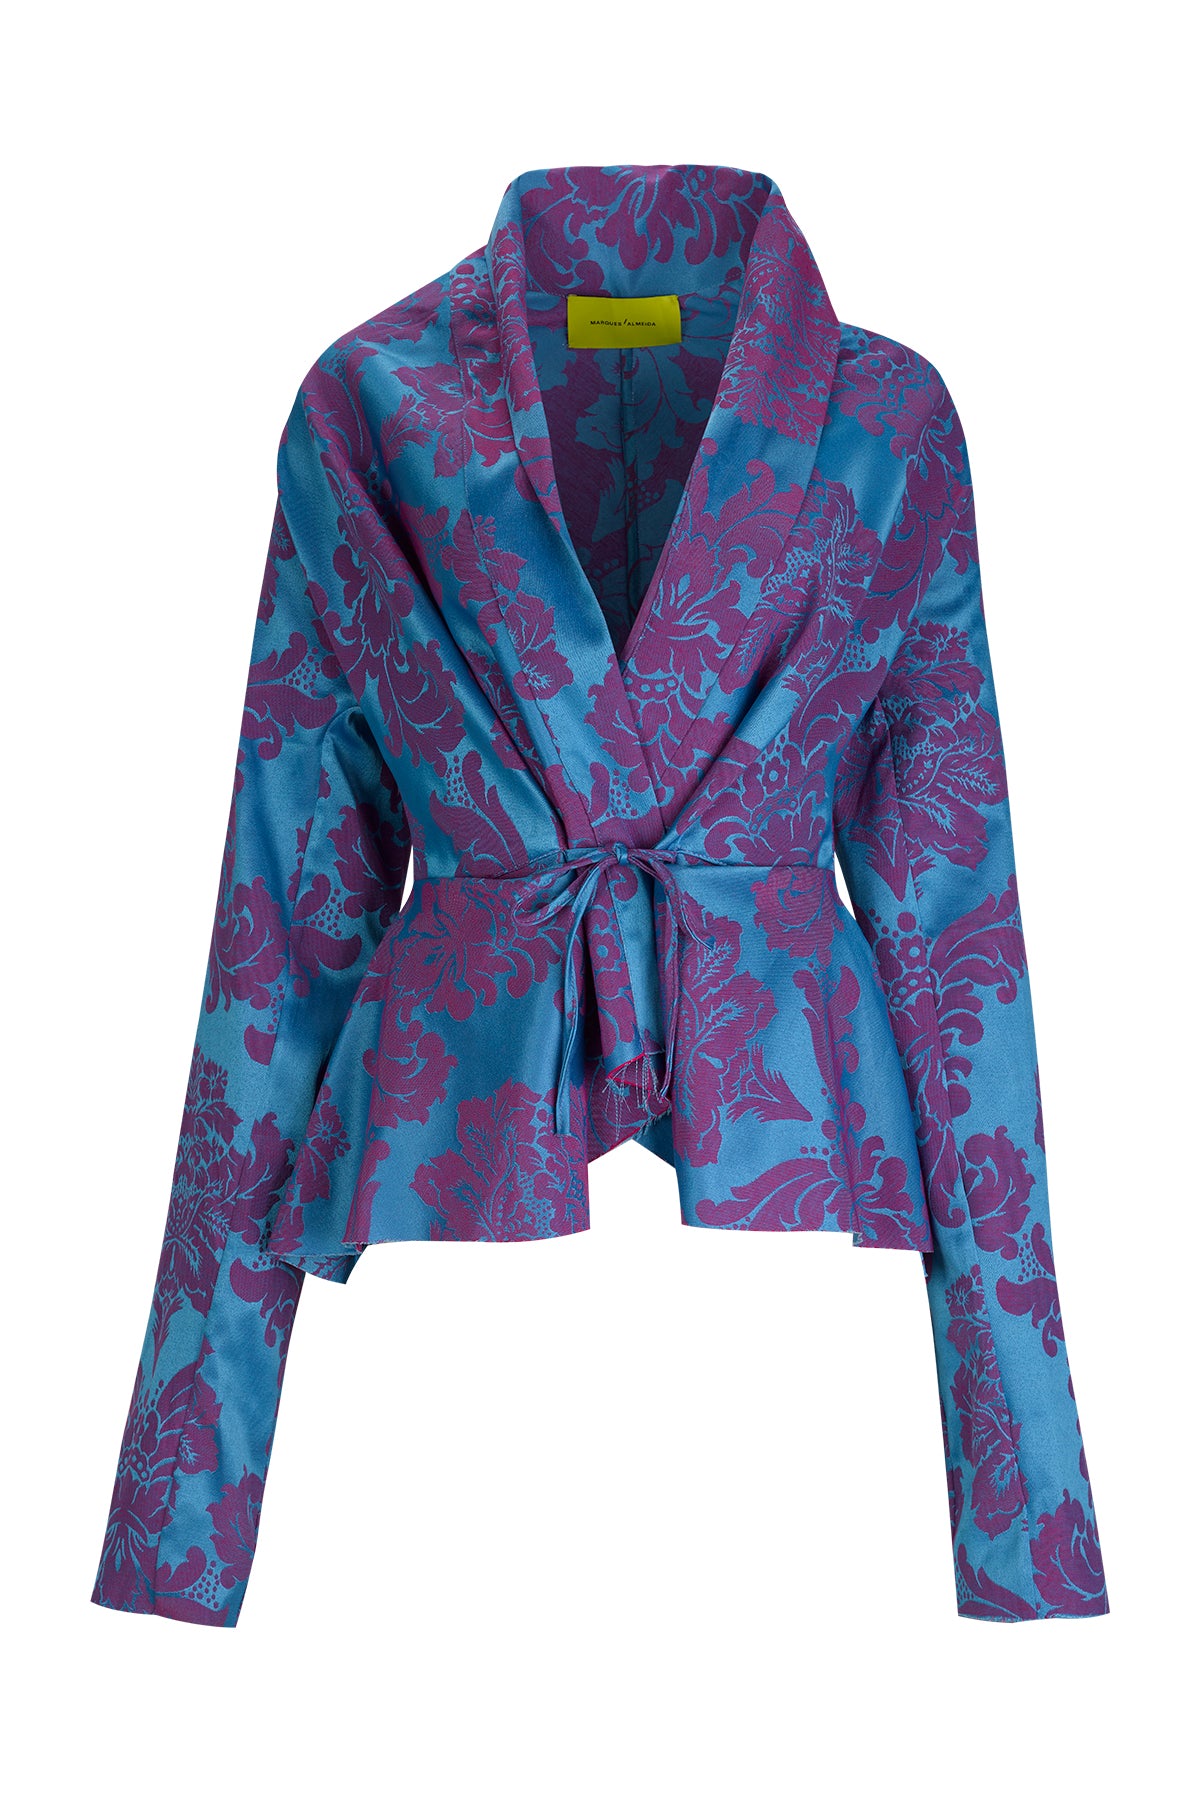 BLUE BROCADE DRAPED FITTED JACKET marques almeida